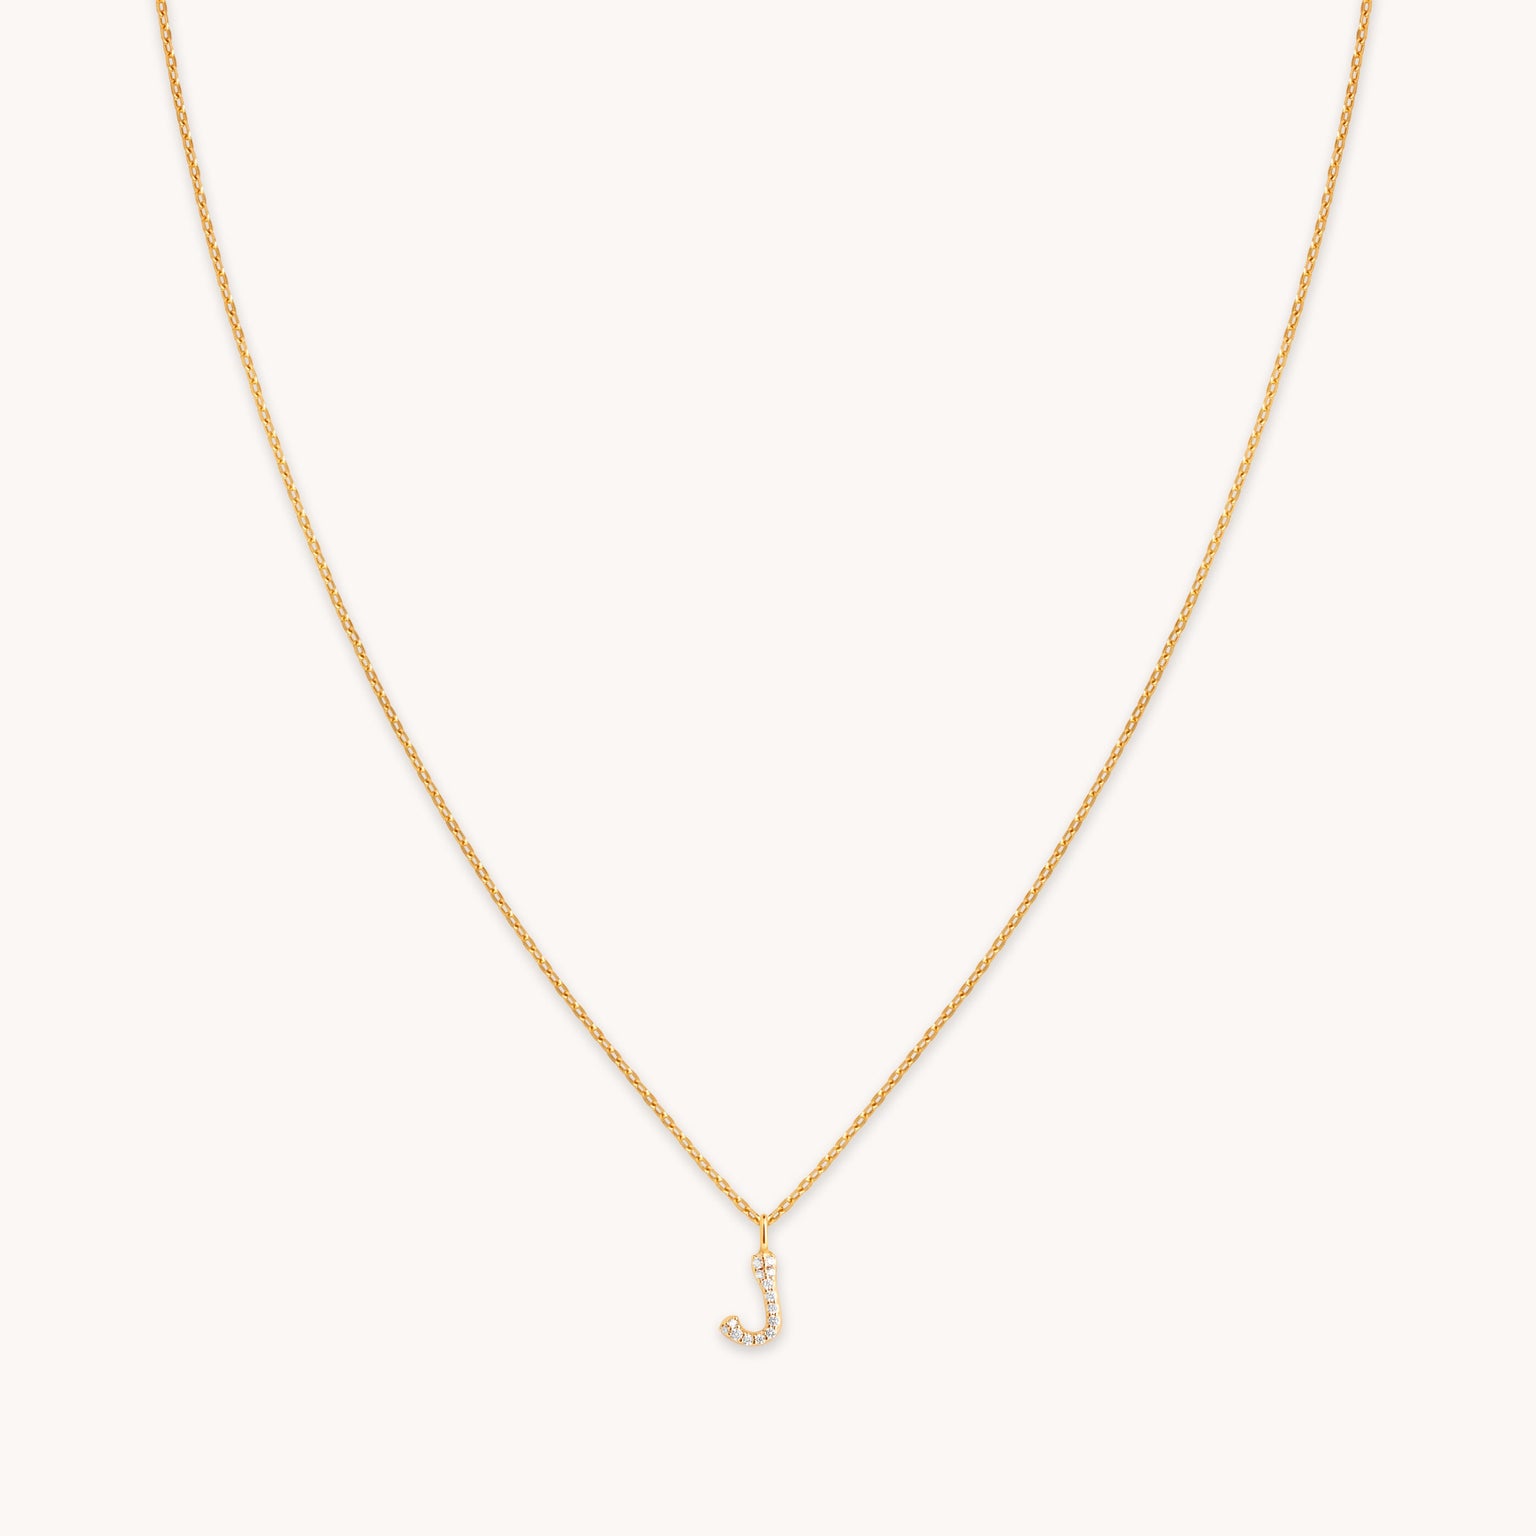 J Initial Pavé Pendant Necklace in Gold